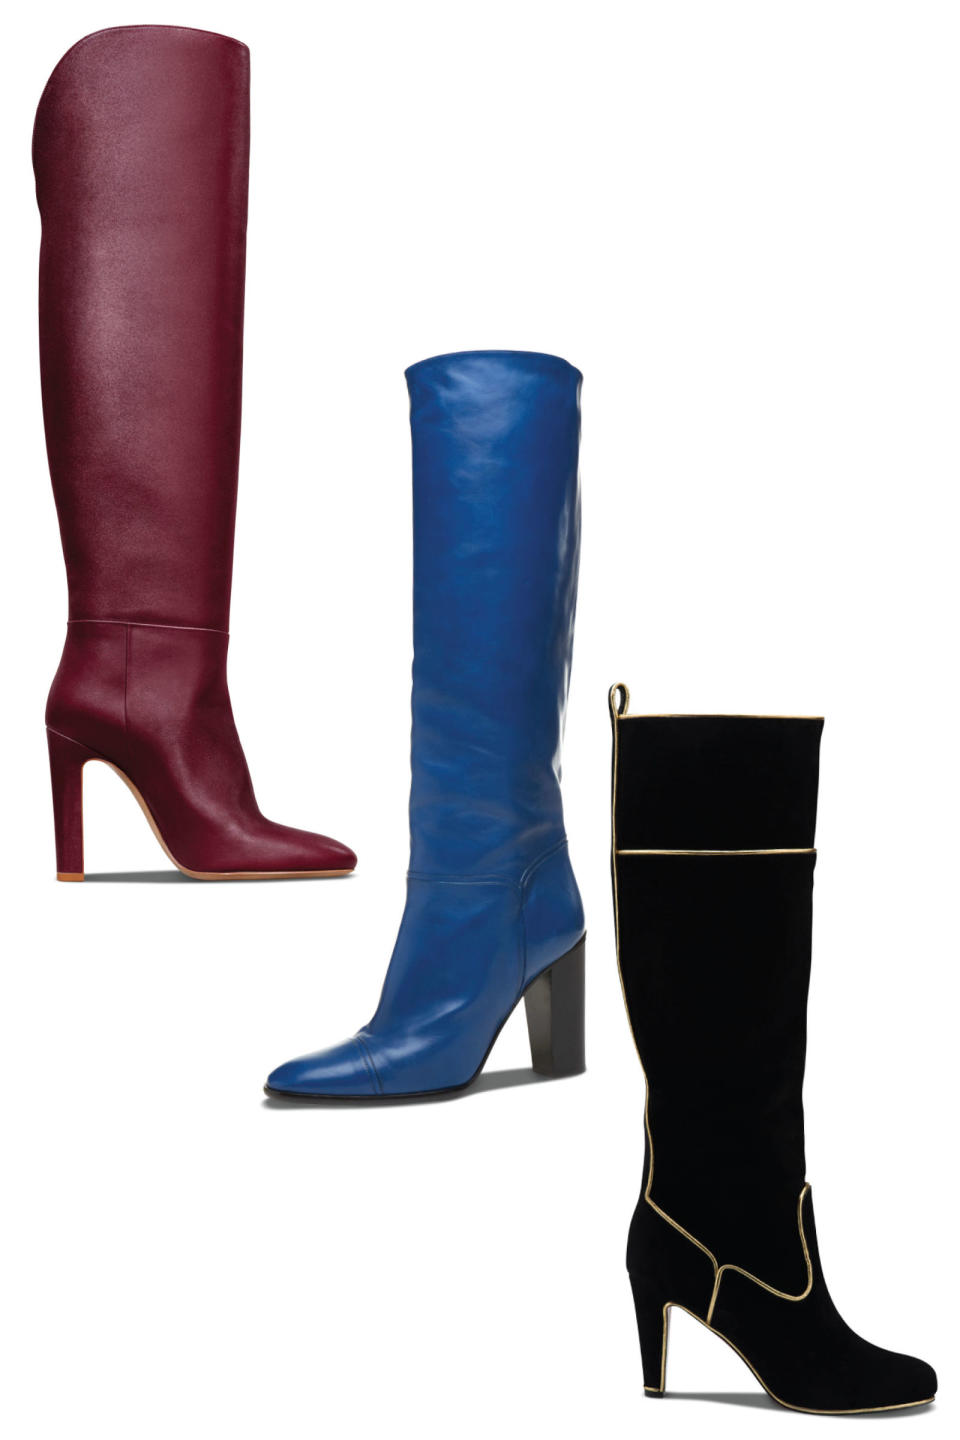 <p>From top left: Leatherboot, MARC JACOBS,$995, visit marcjacobs.com. Leather boot,GABRIELA HEARST,$1,595, collection at barneys.com. Suede boot, CHRISTIAN LOUBOUTIN, $1,395, visit christianlouboutin.com</p>